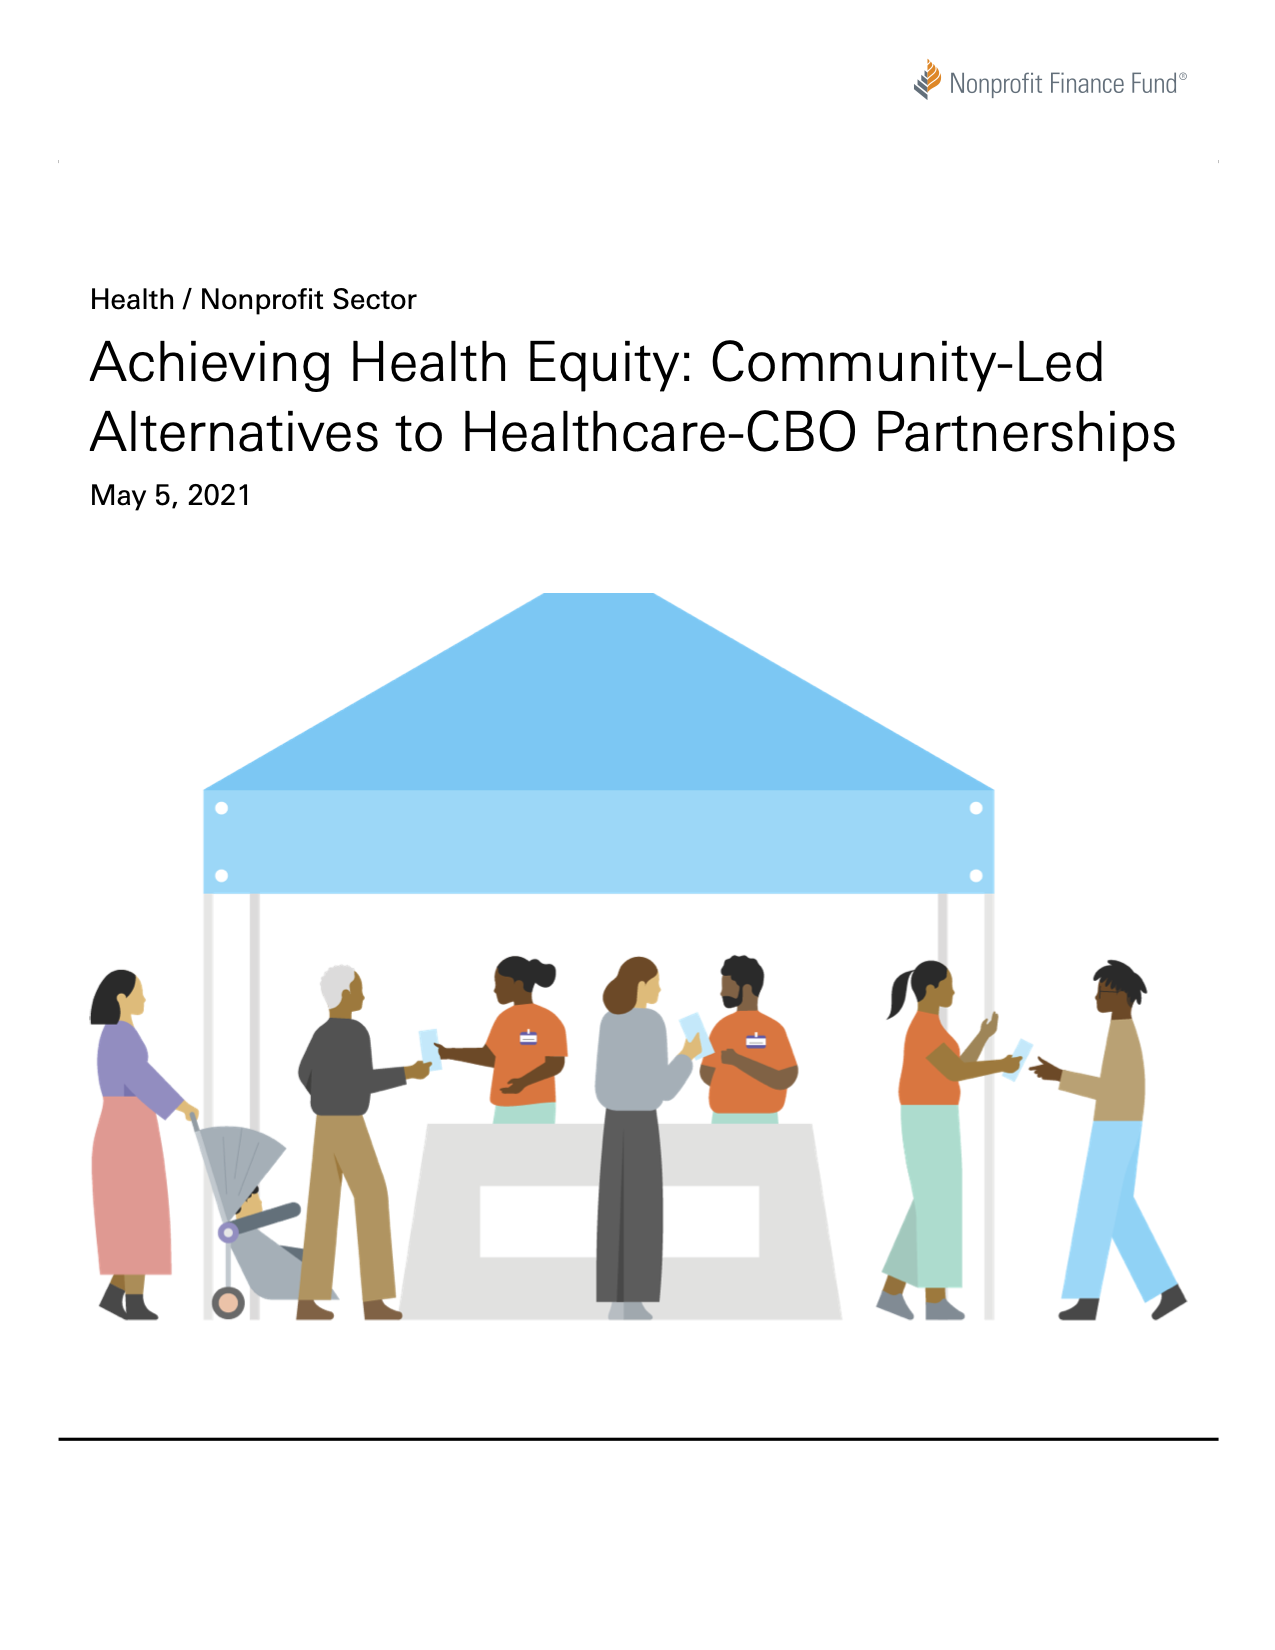 Achieving Health Equity: Community-Led Alternatives to Healthcare-CBO Partnerships